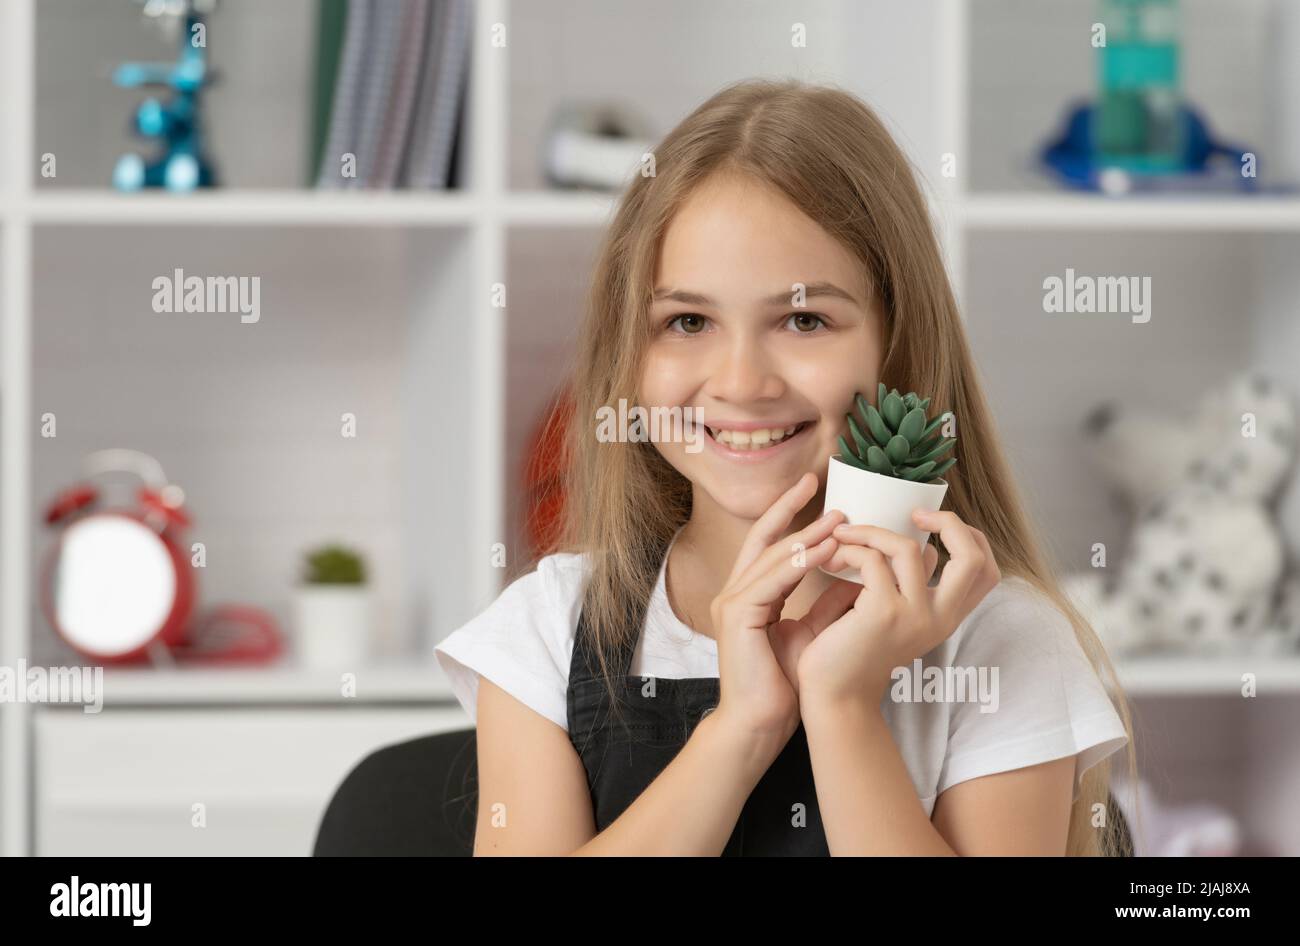 positive child hold potted plant in school classroom Stock Photo